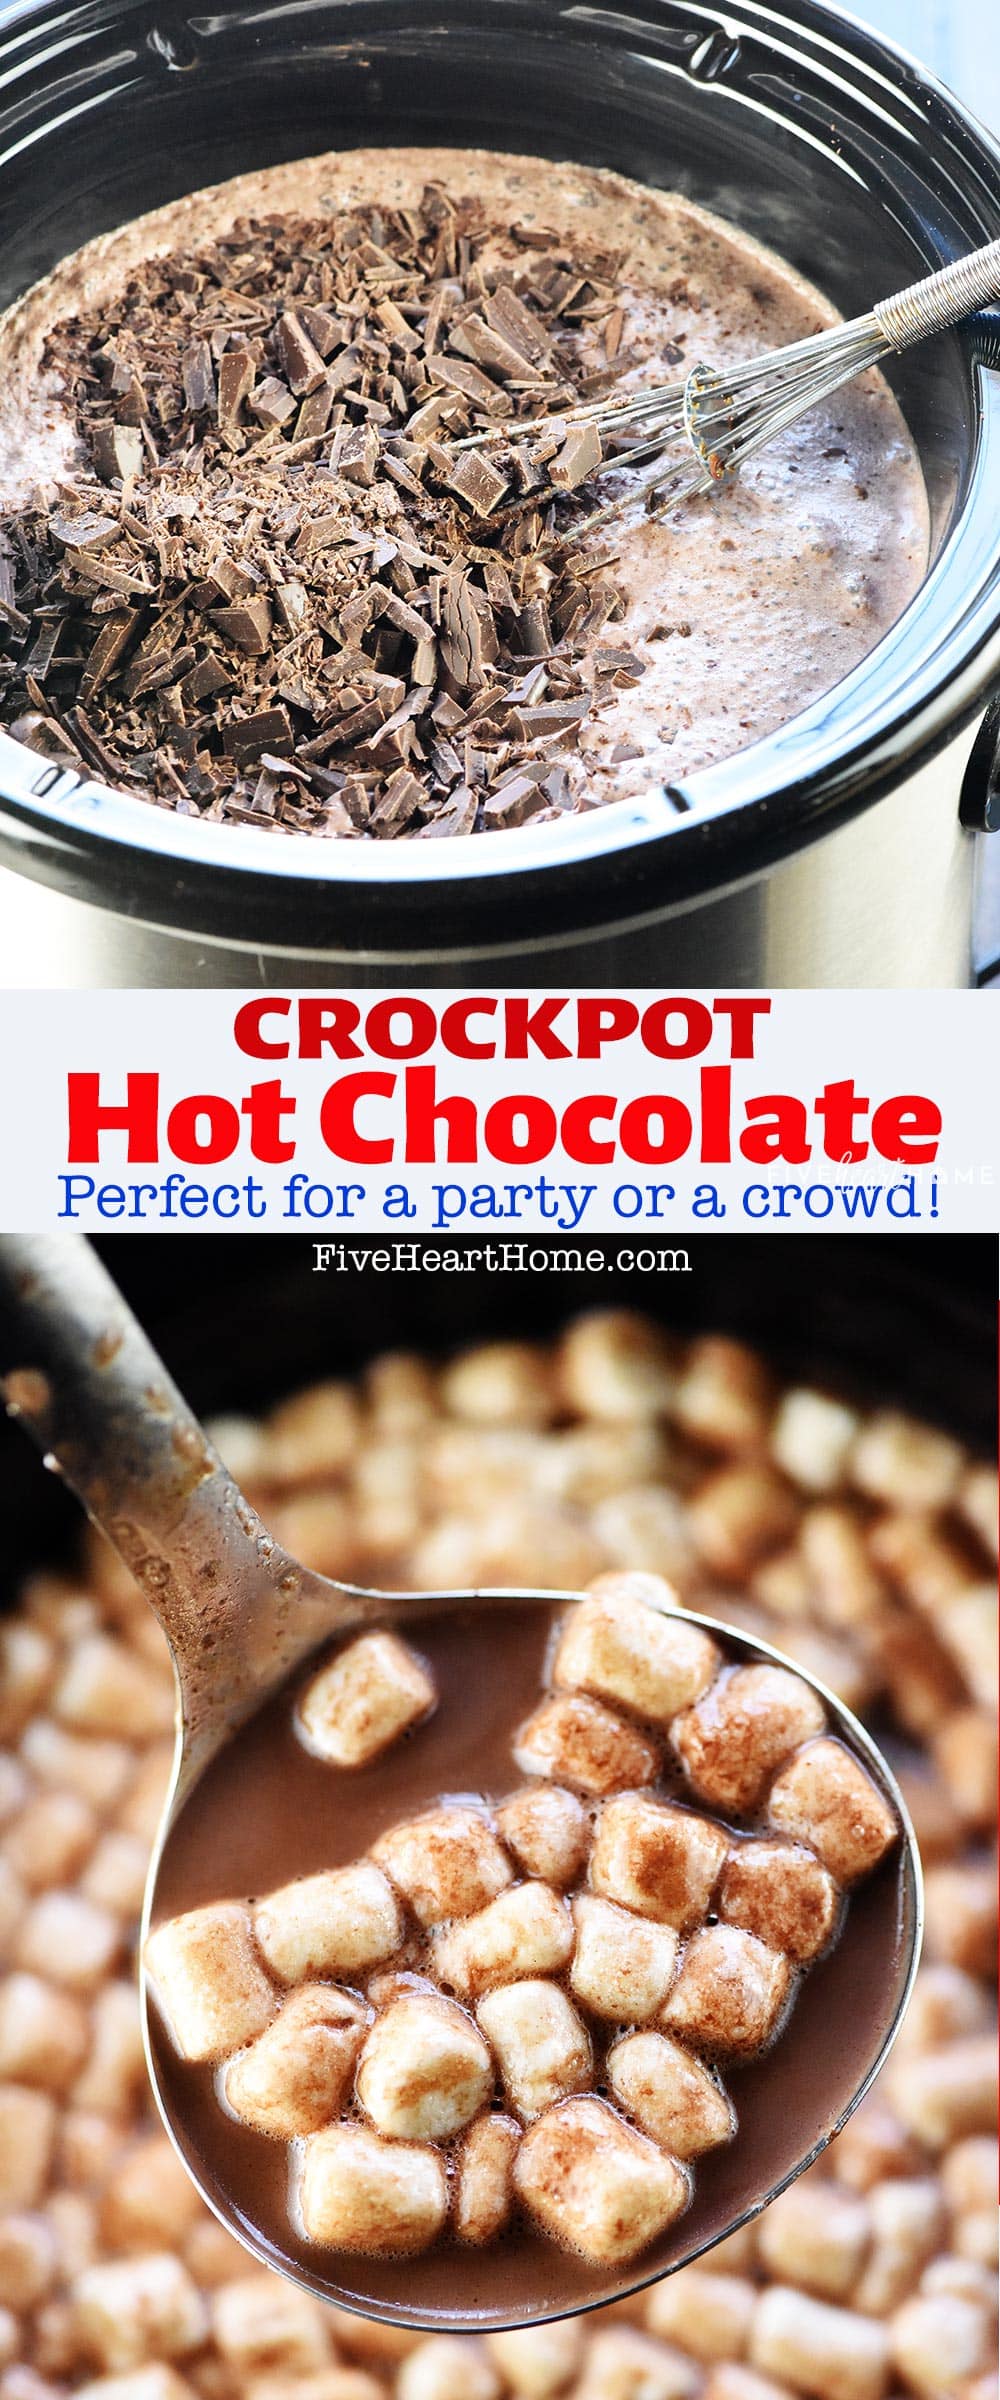 Crockpot Hot Chocolate ~ the easiest way to make a big batch of rich, decadent slow cooker hot chocolate for a crowd...and four flavor variations make it extra yummy! | FiveHeartHome.com via @fivehearthome